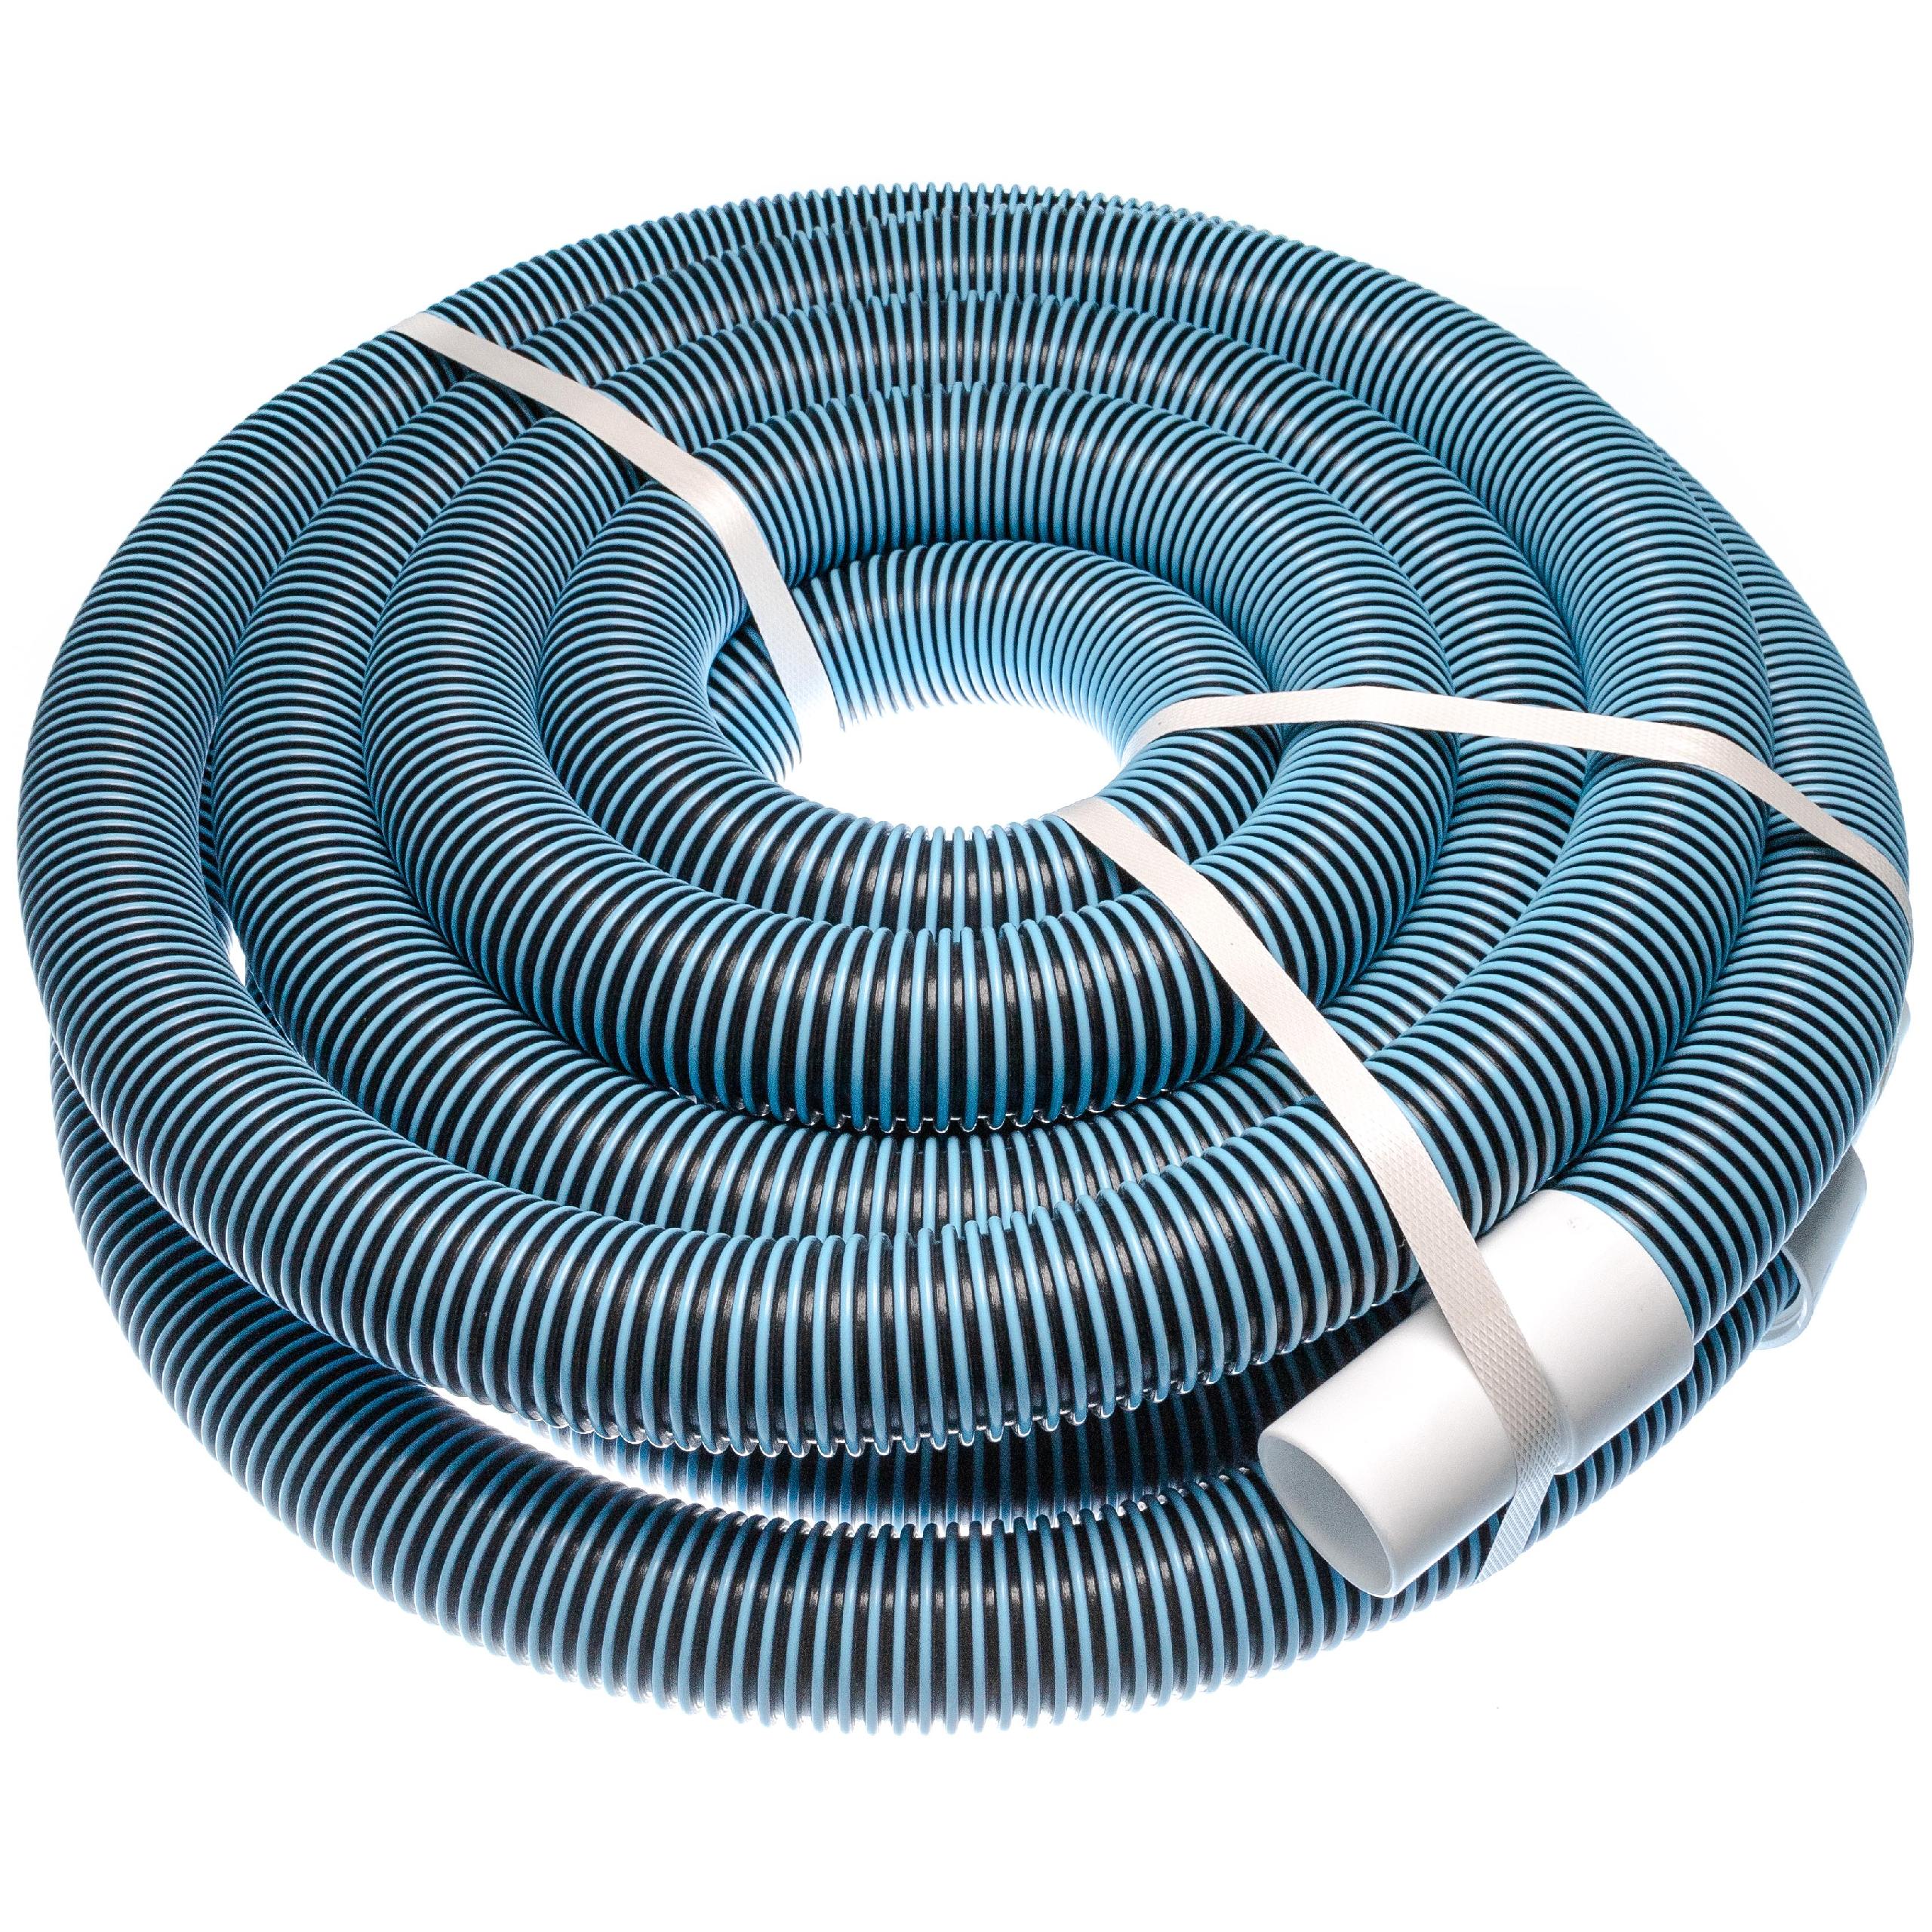 Hose Pipe suitable for Skimmer, Filter, Pool Cleaner Robot - connector 38 mm, 7.6 m